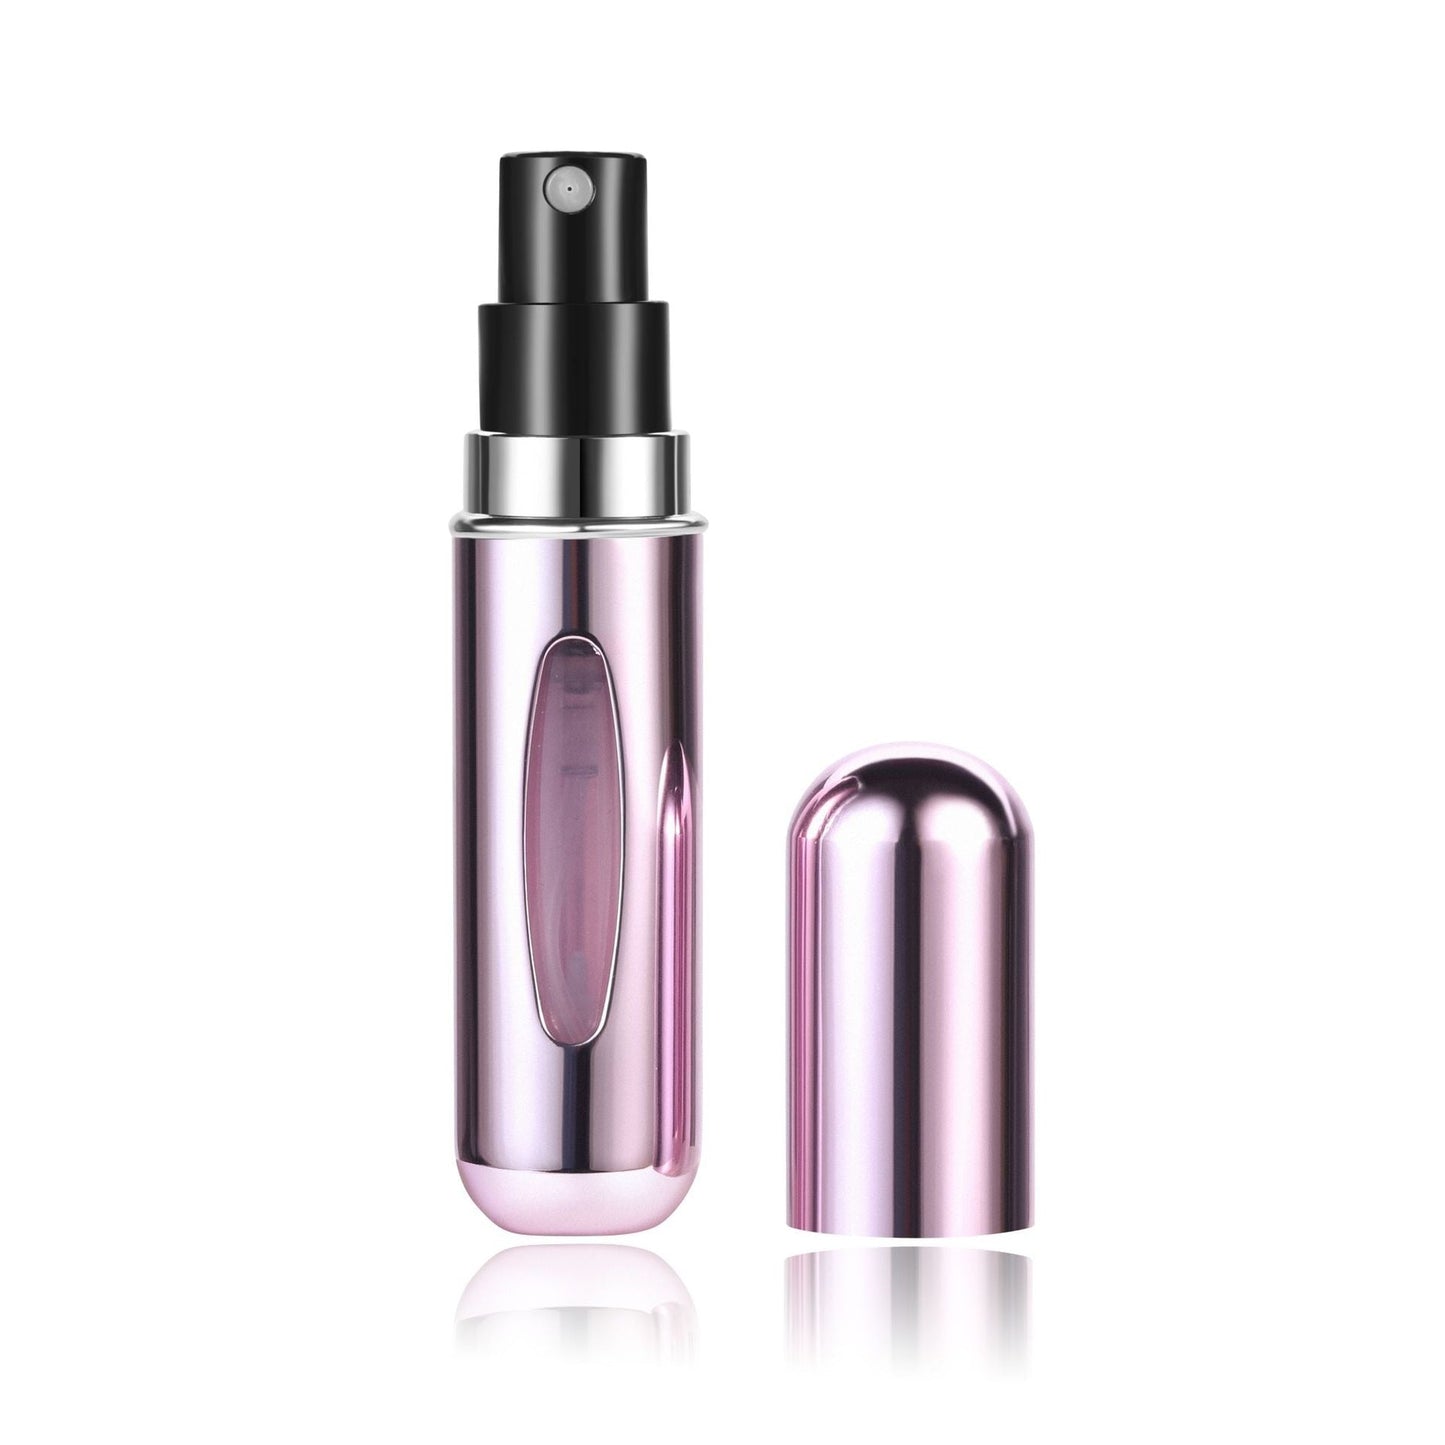 5ml Perfume Refill Bottle Portable Mini Refillable Spray Jar Scent Pump Empty Cosmetic Containers Atomizer for Travel Tool Hot 5ml NO.2